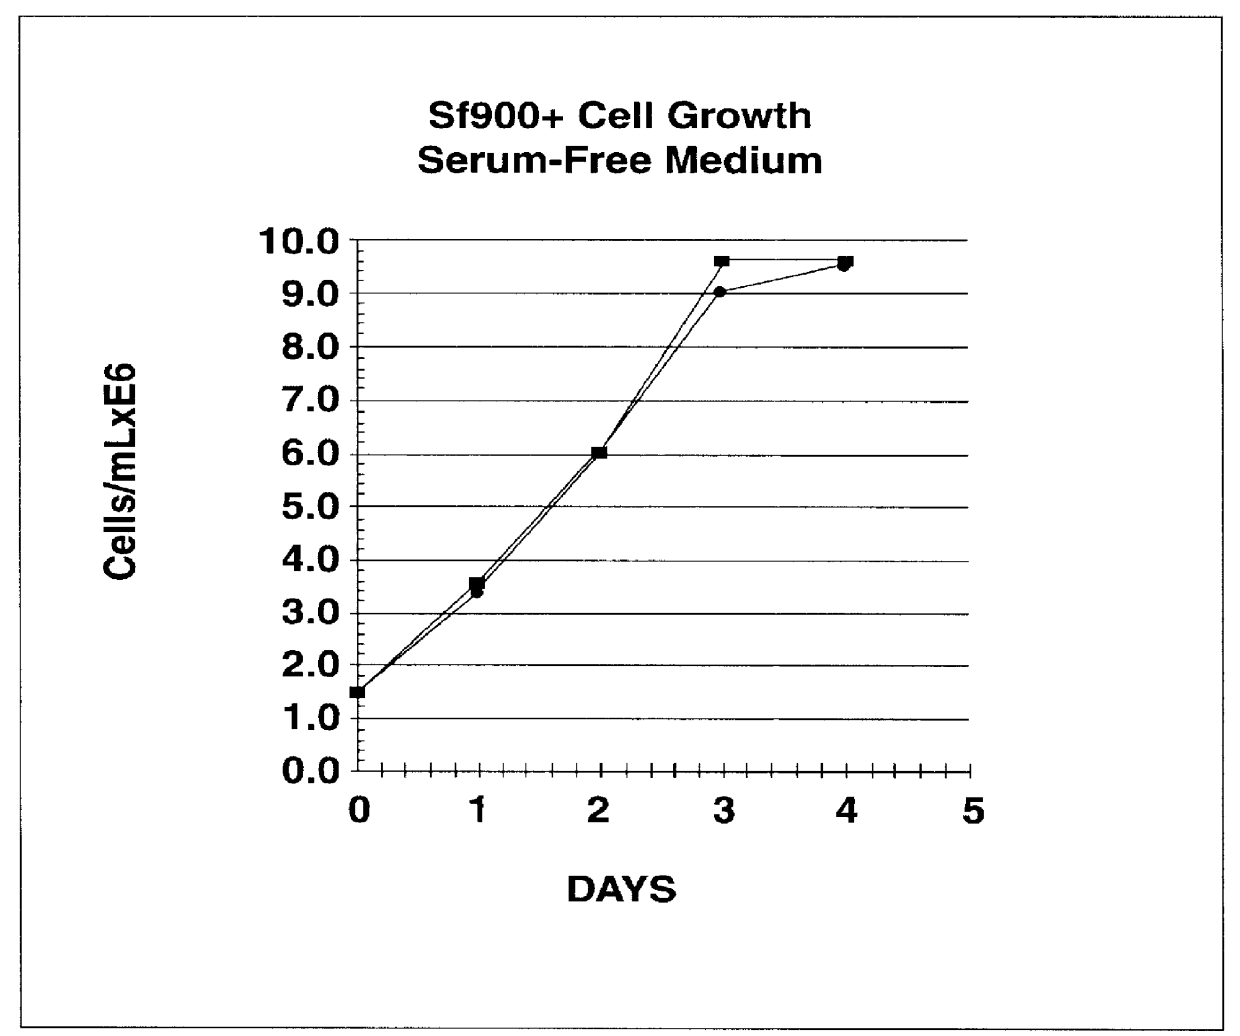 Spodoptera frugiperda single cell suspension cell line in serum-free media, methods of producing and using